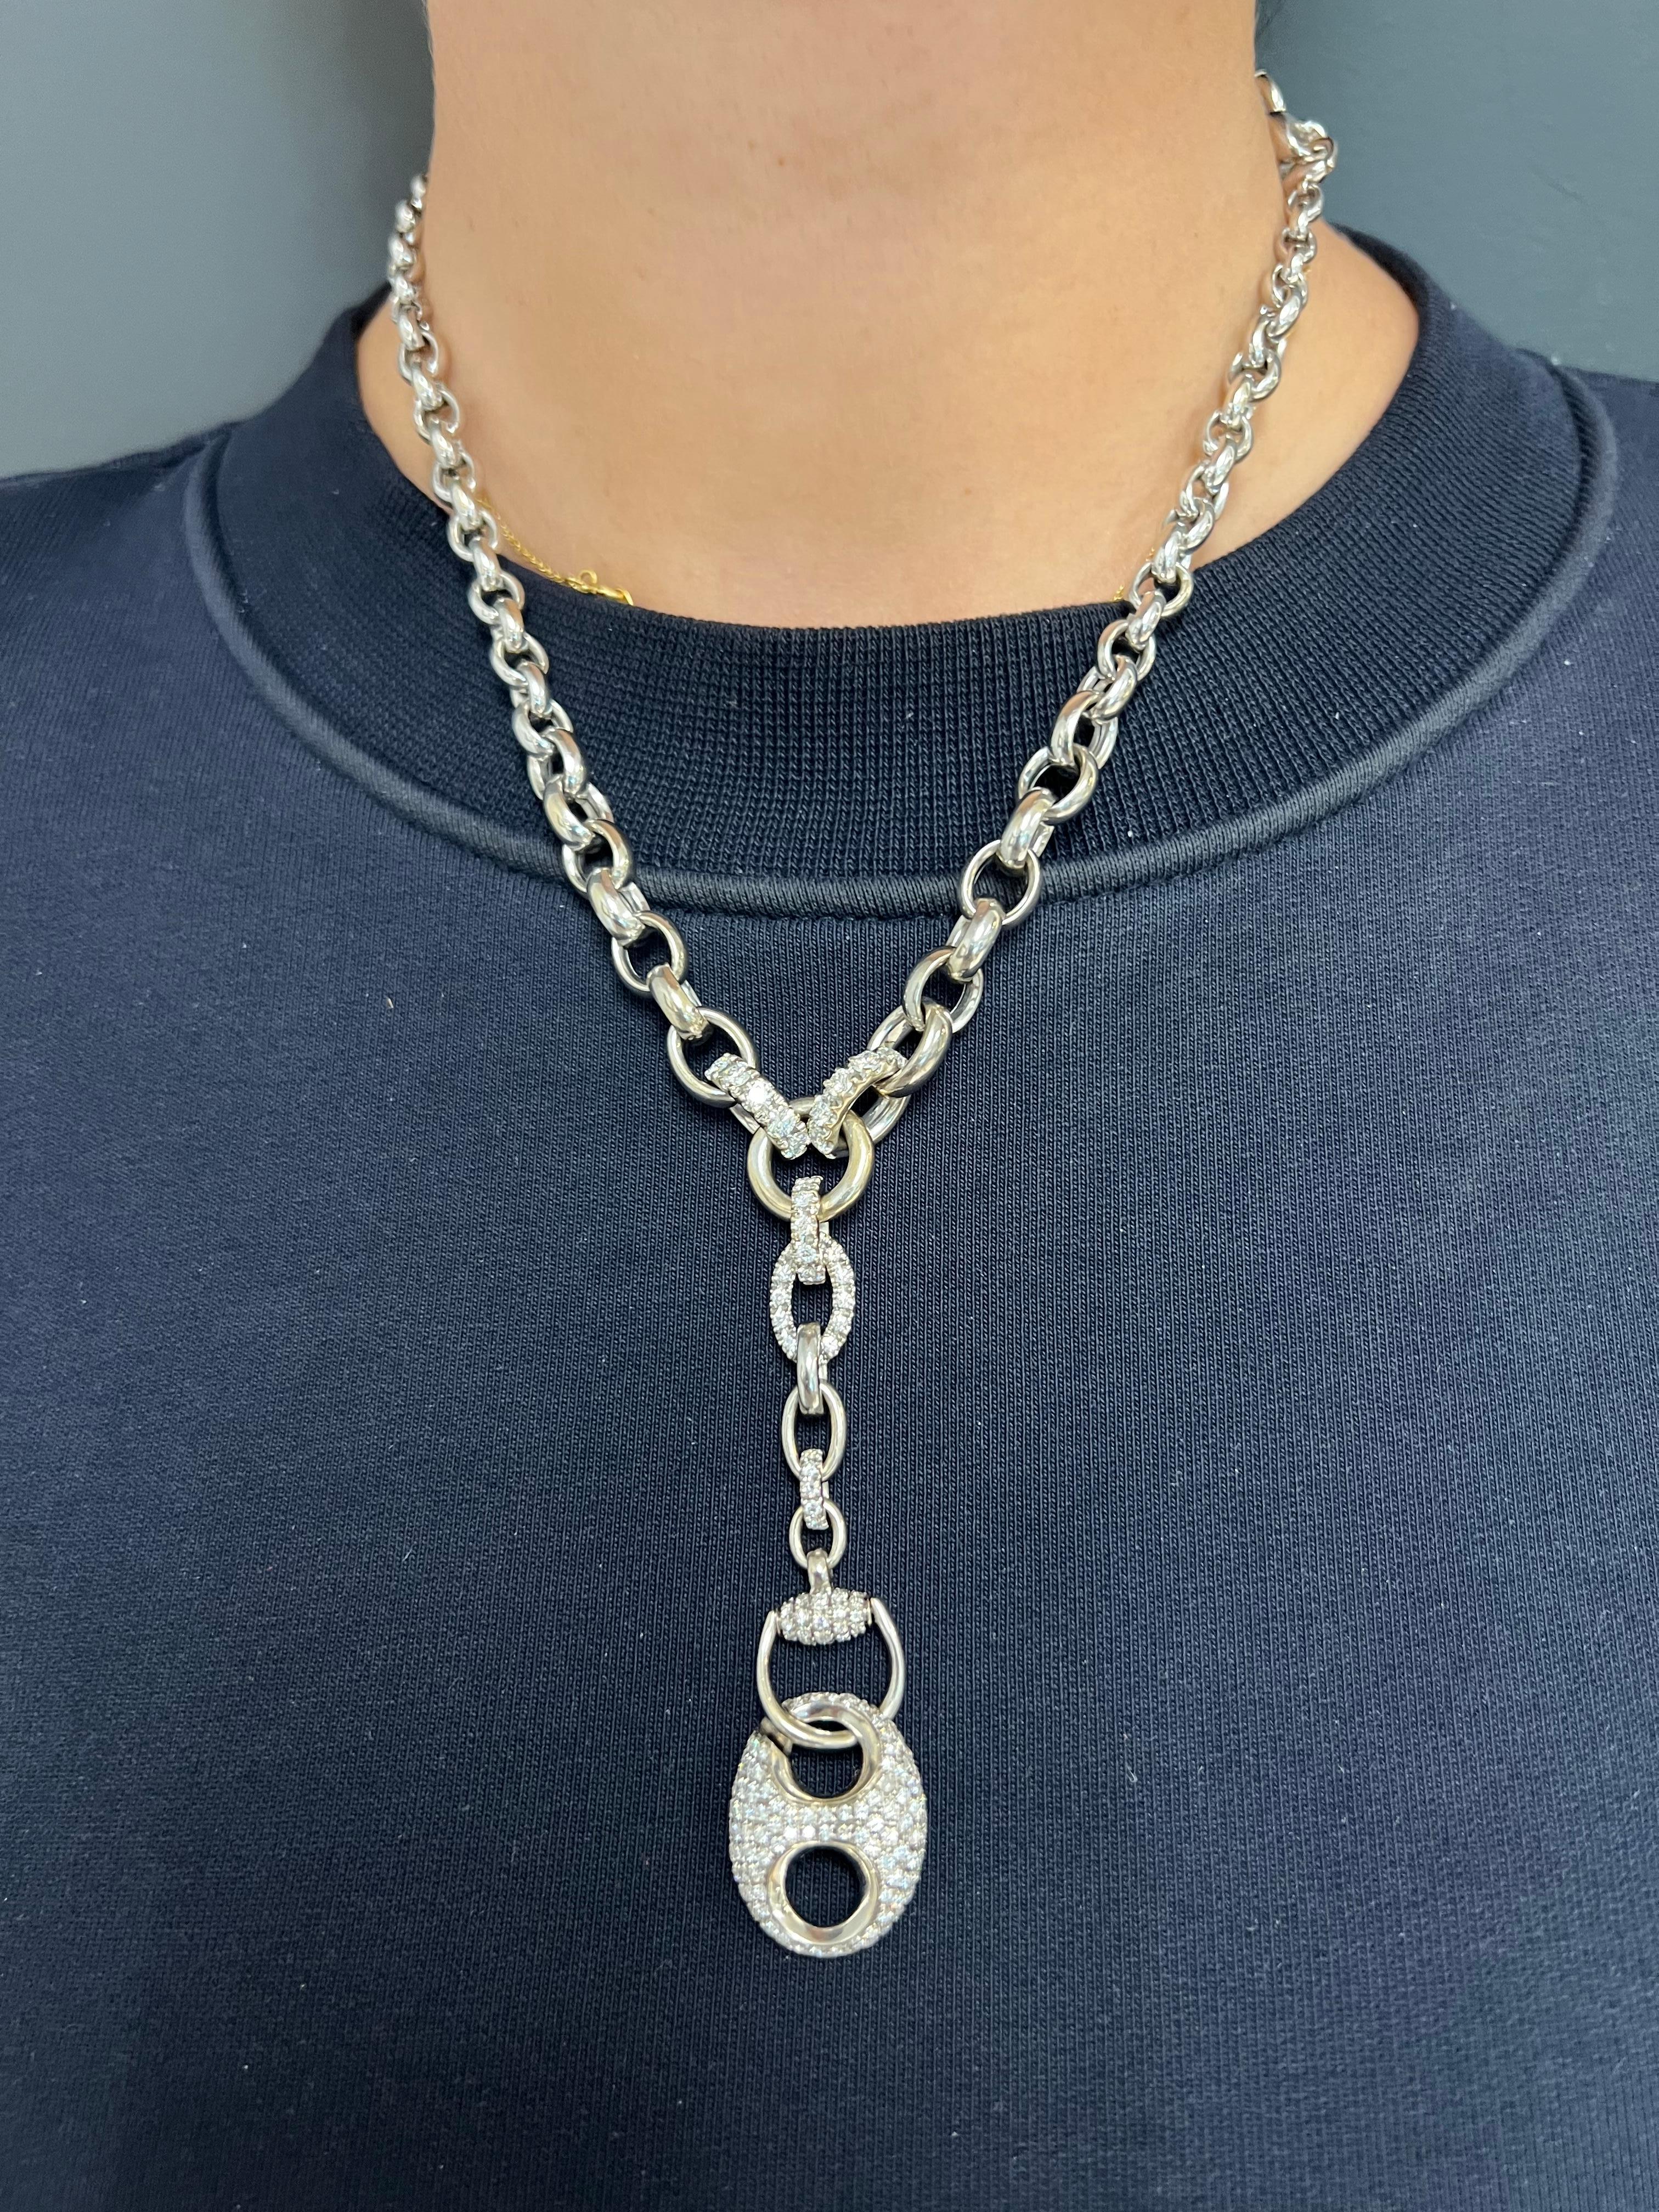 DESIGNER: Gucci
CIRCA: 1990’s
MATERIALS: 18k White Gold
GEMSTONE: 3.37 cts. Round Brilliant Diamond
WEIGHT: 50.1 grams
MEASUREMENTS: Necklace: 18” long, Pendant: 3” x 3/4”
HALLMARKS: 750, Gucci Made in Italy
ITEM DETAILS:
An 18k white gold and